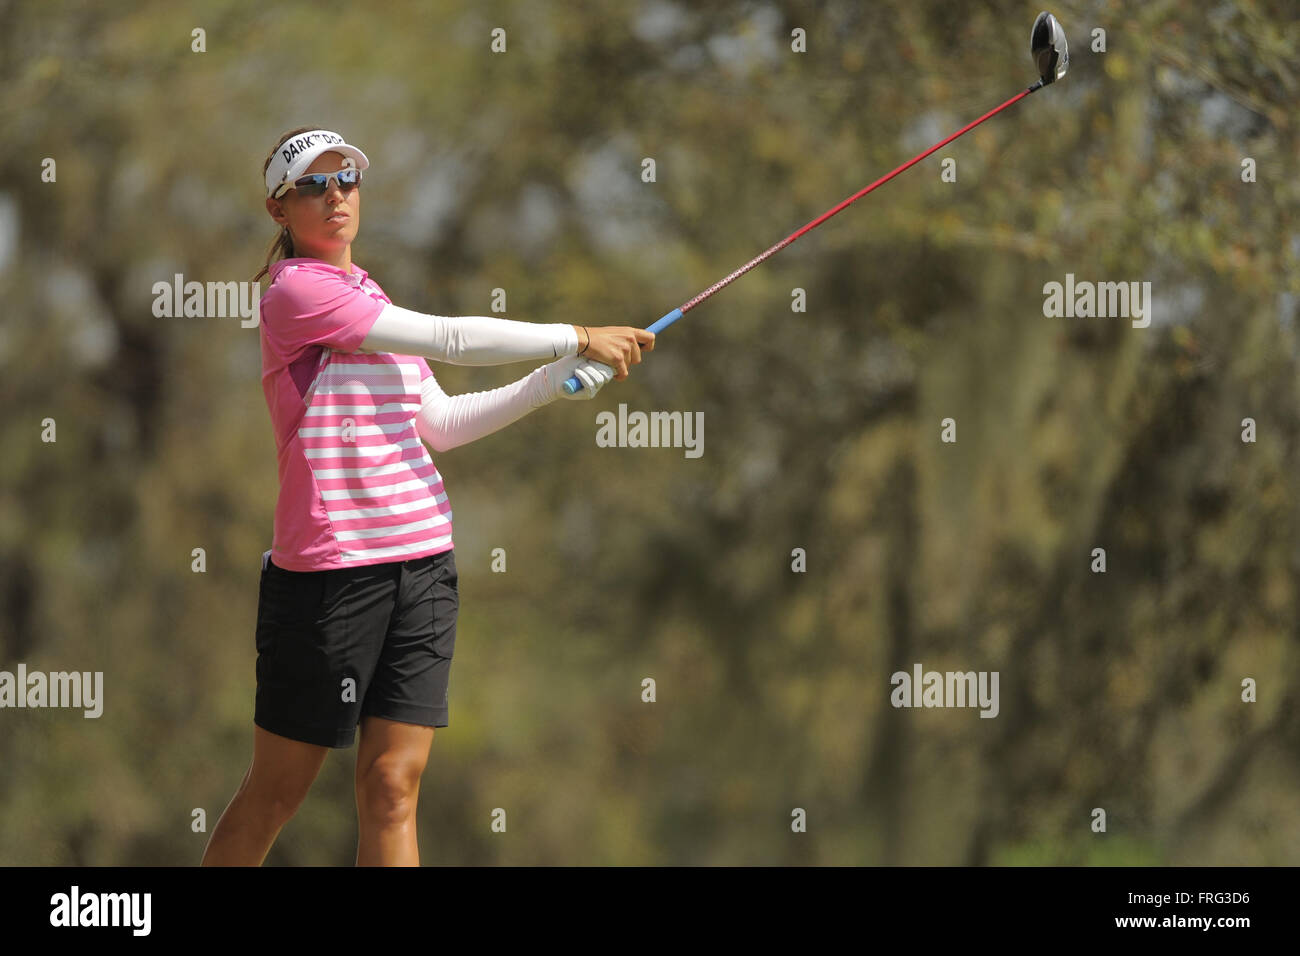 March 22, 2014 - Lake Wales, FL, USA - Elisa Serramia during the second round of the Florida's Natural Charity Classic at Lake Wales Country Club on March 22, 2014 in Lake Wales, FL...ZUMA PRESS/Scott A. Miller (Credit Image: © Scott A. Miller via ZUMA Wire) Stock Photo